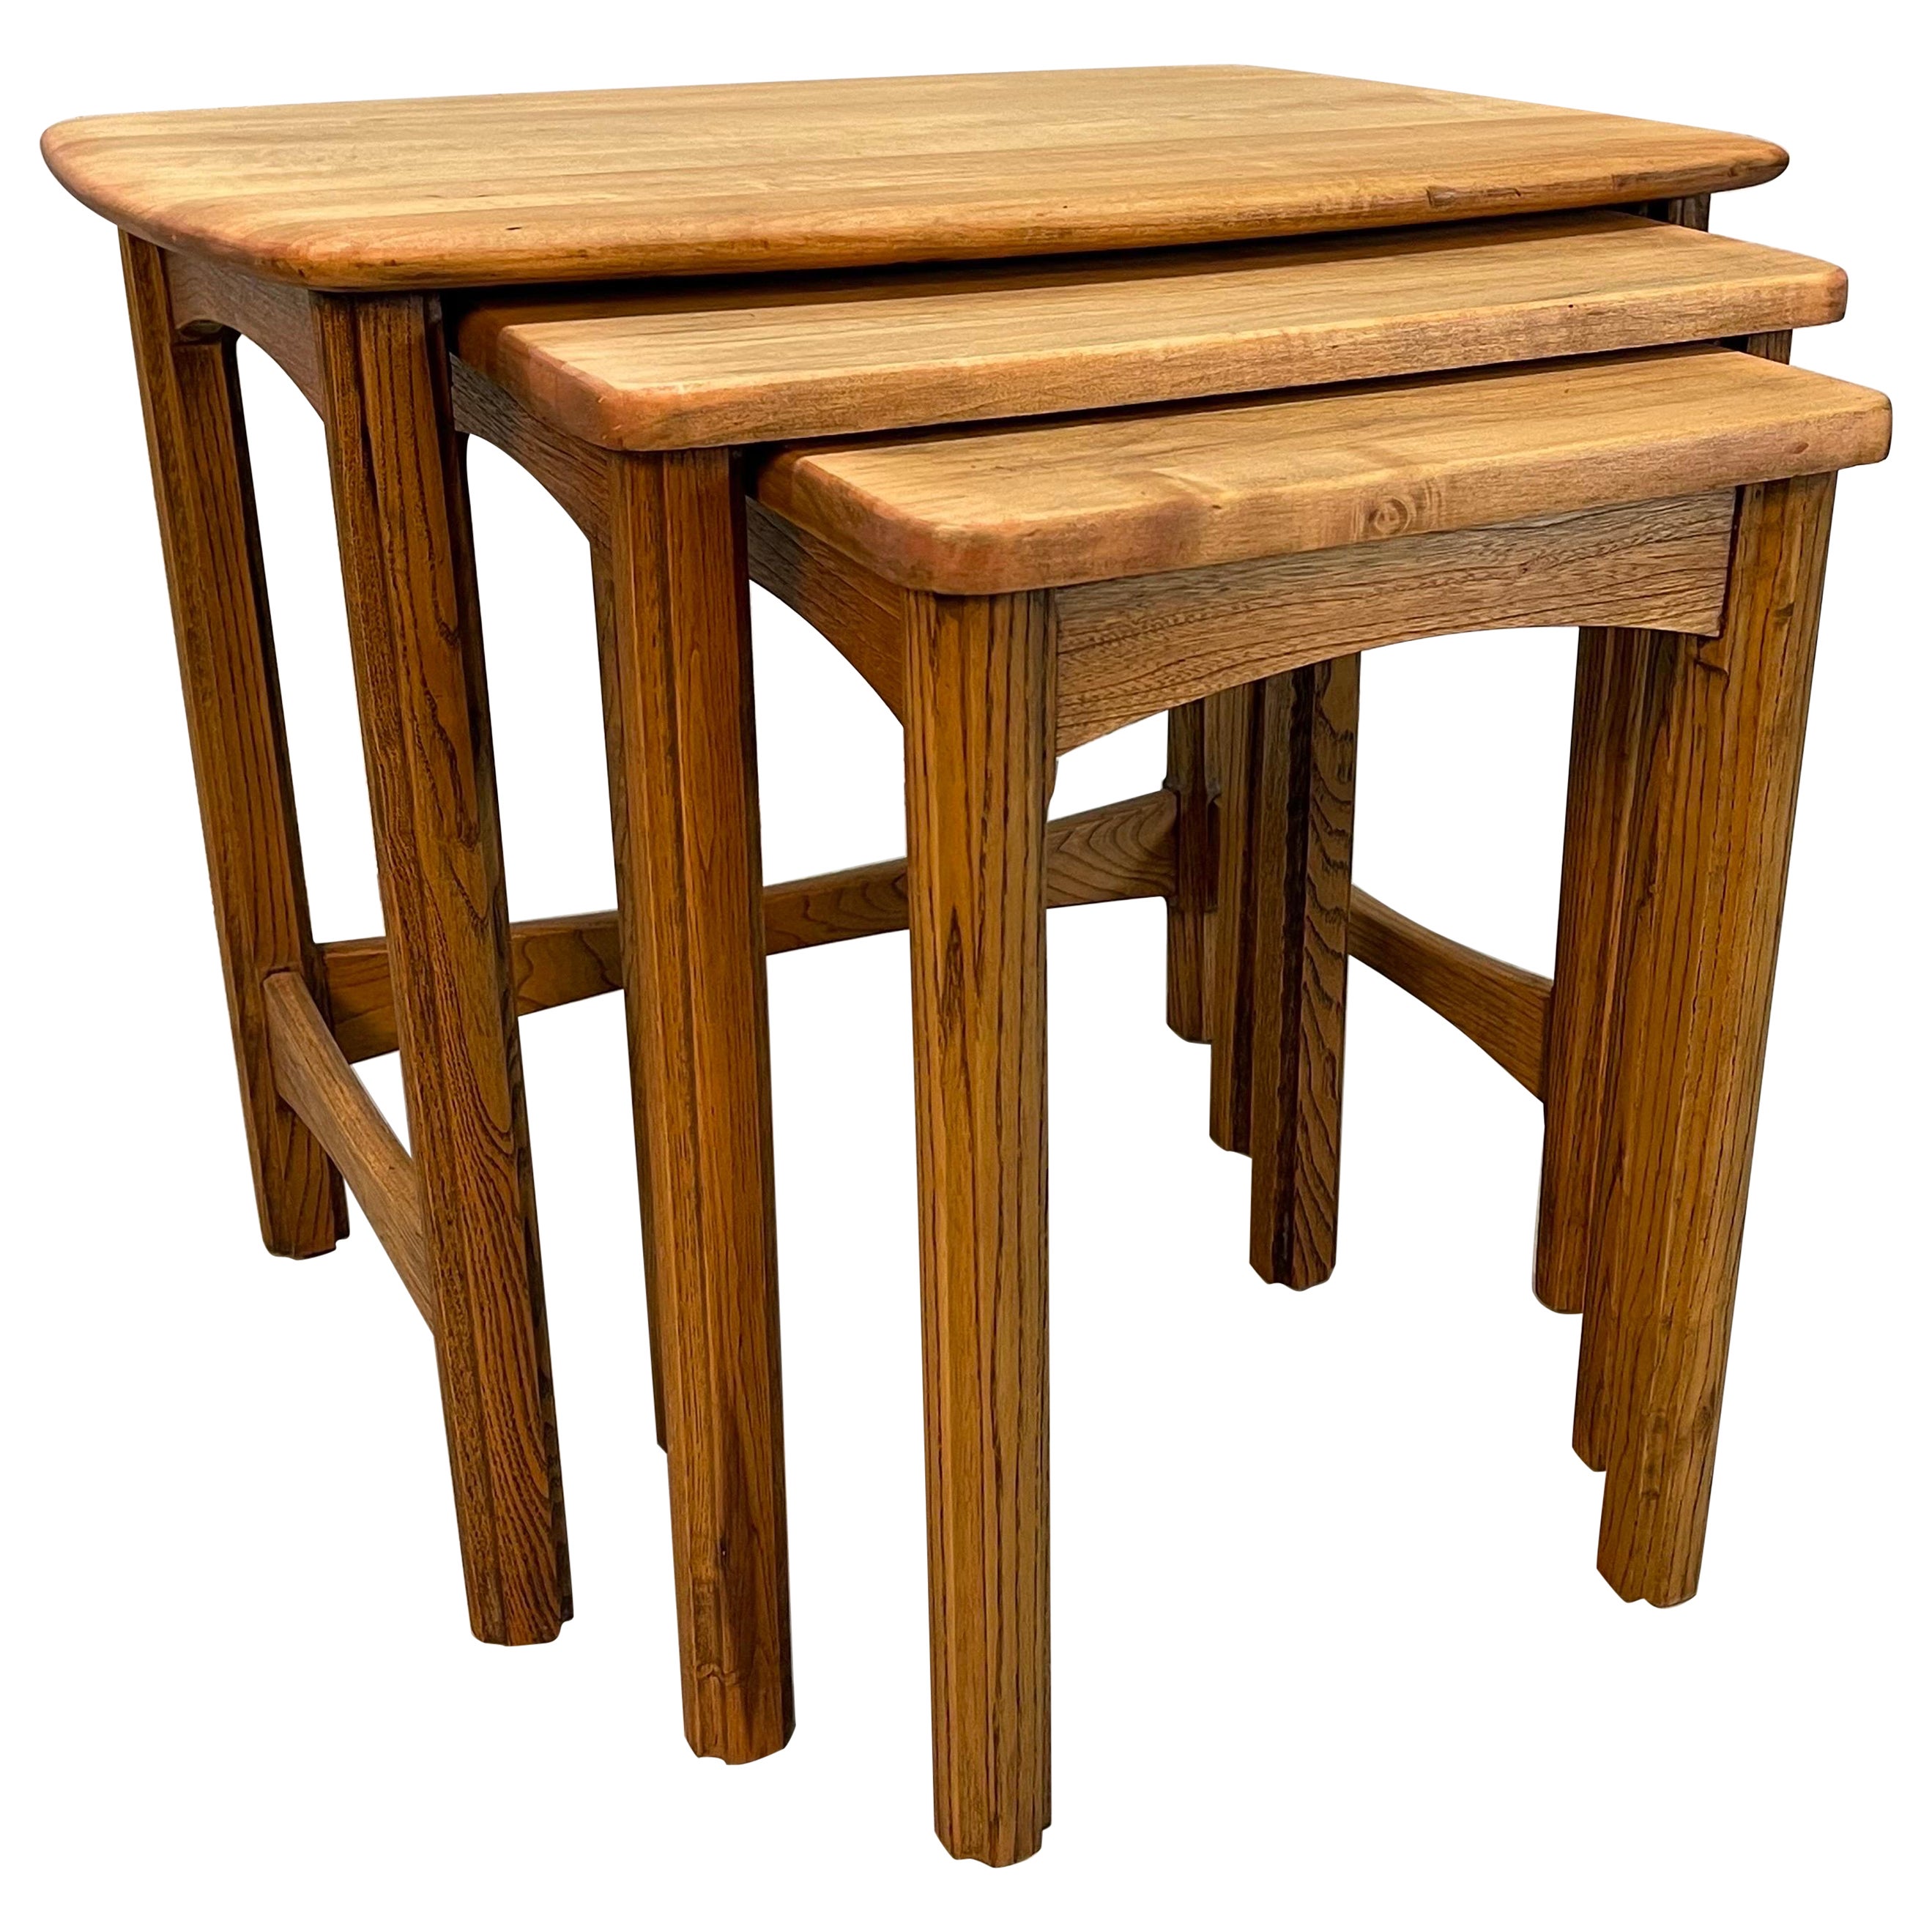 1960s Maple Wood Nesting Tables For Sale